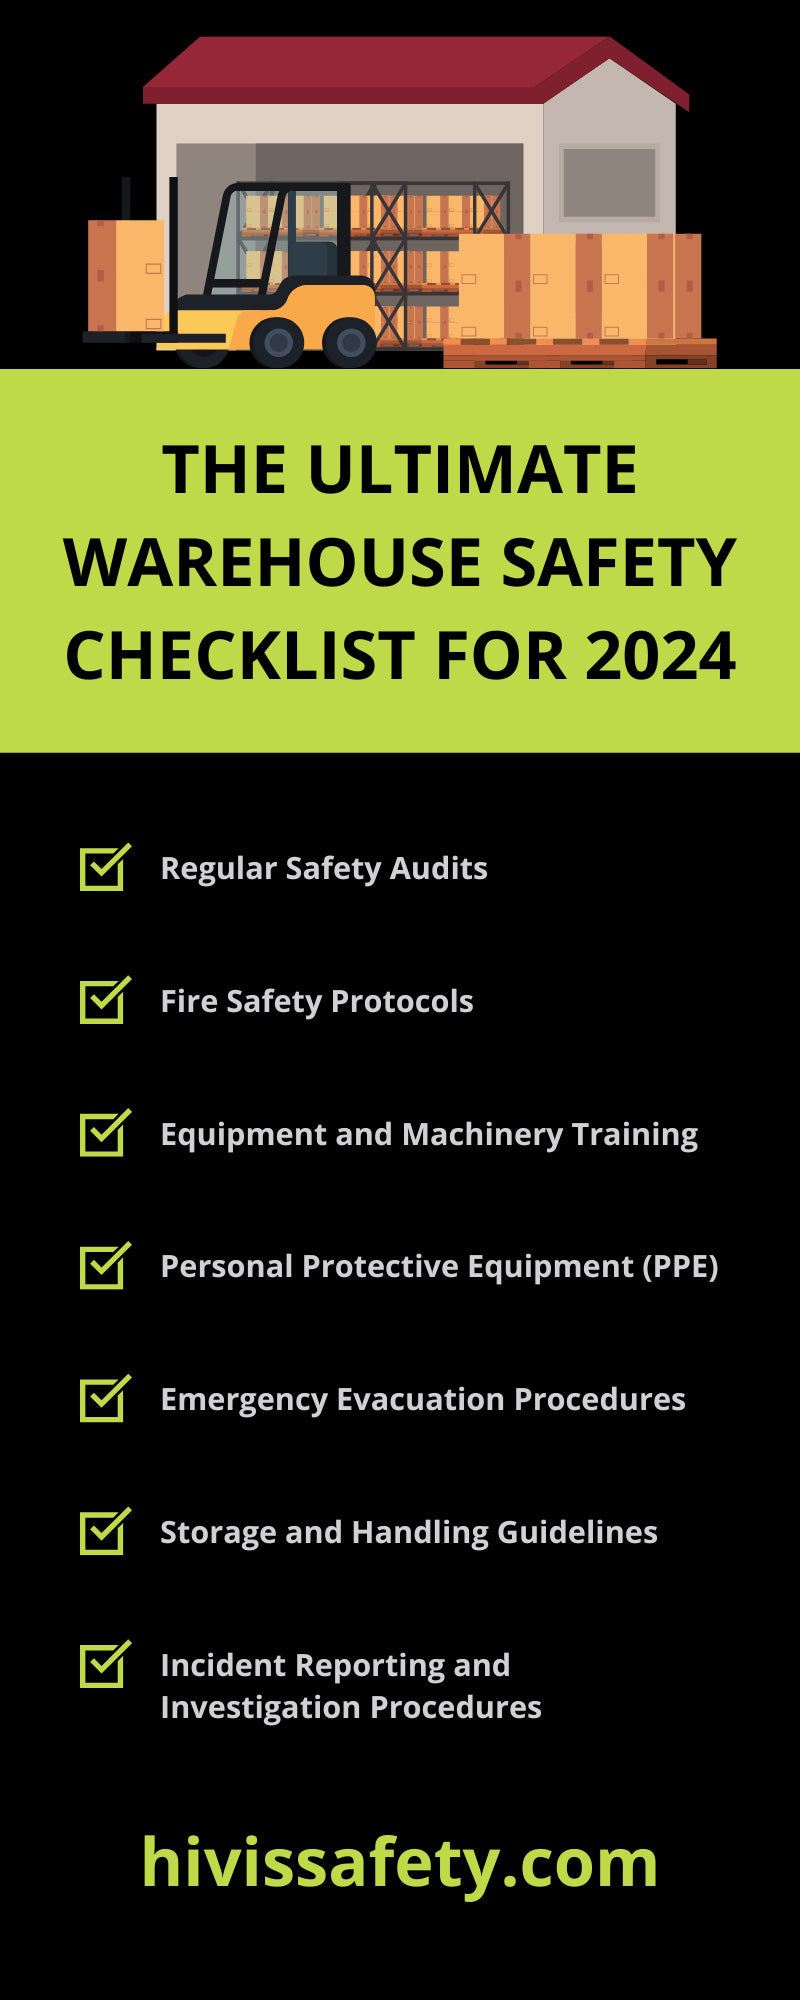 The Ultimate Warehouse Safety Checklist for 2024